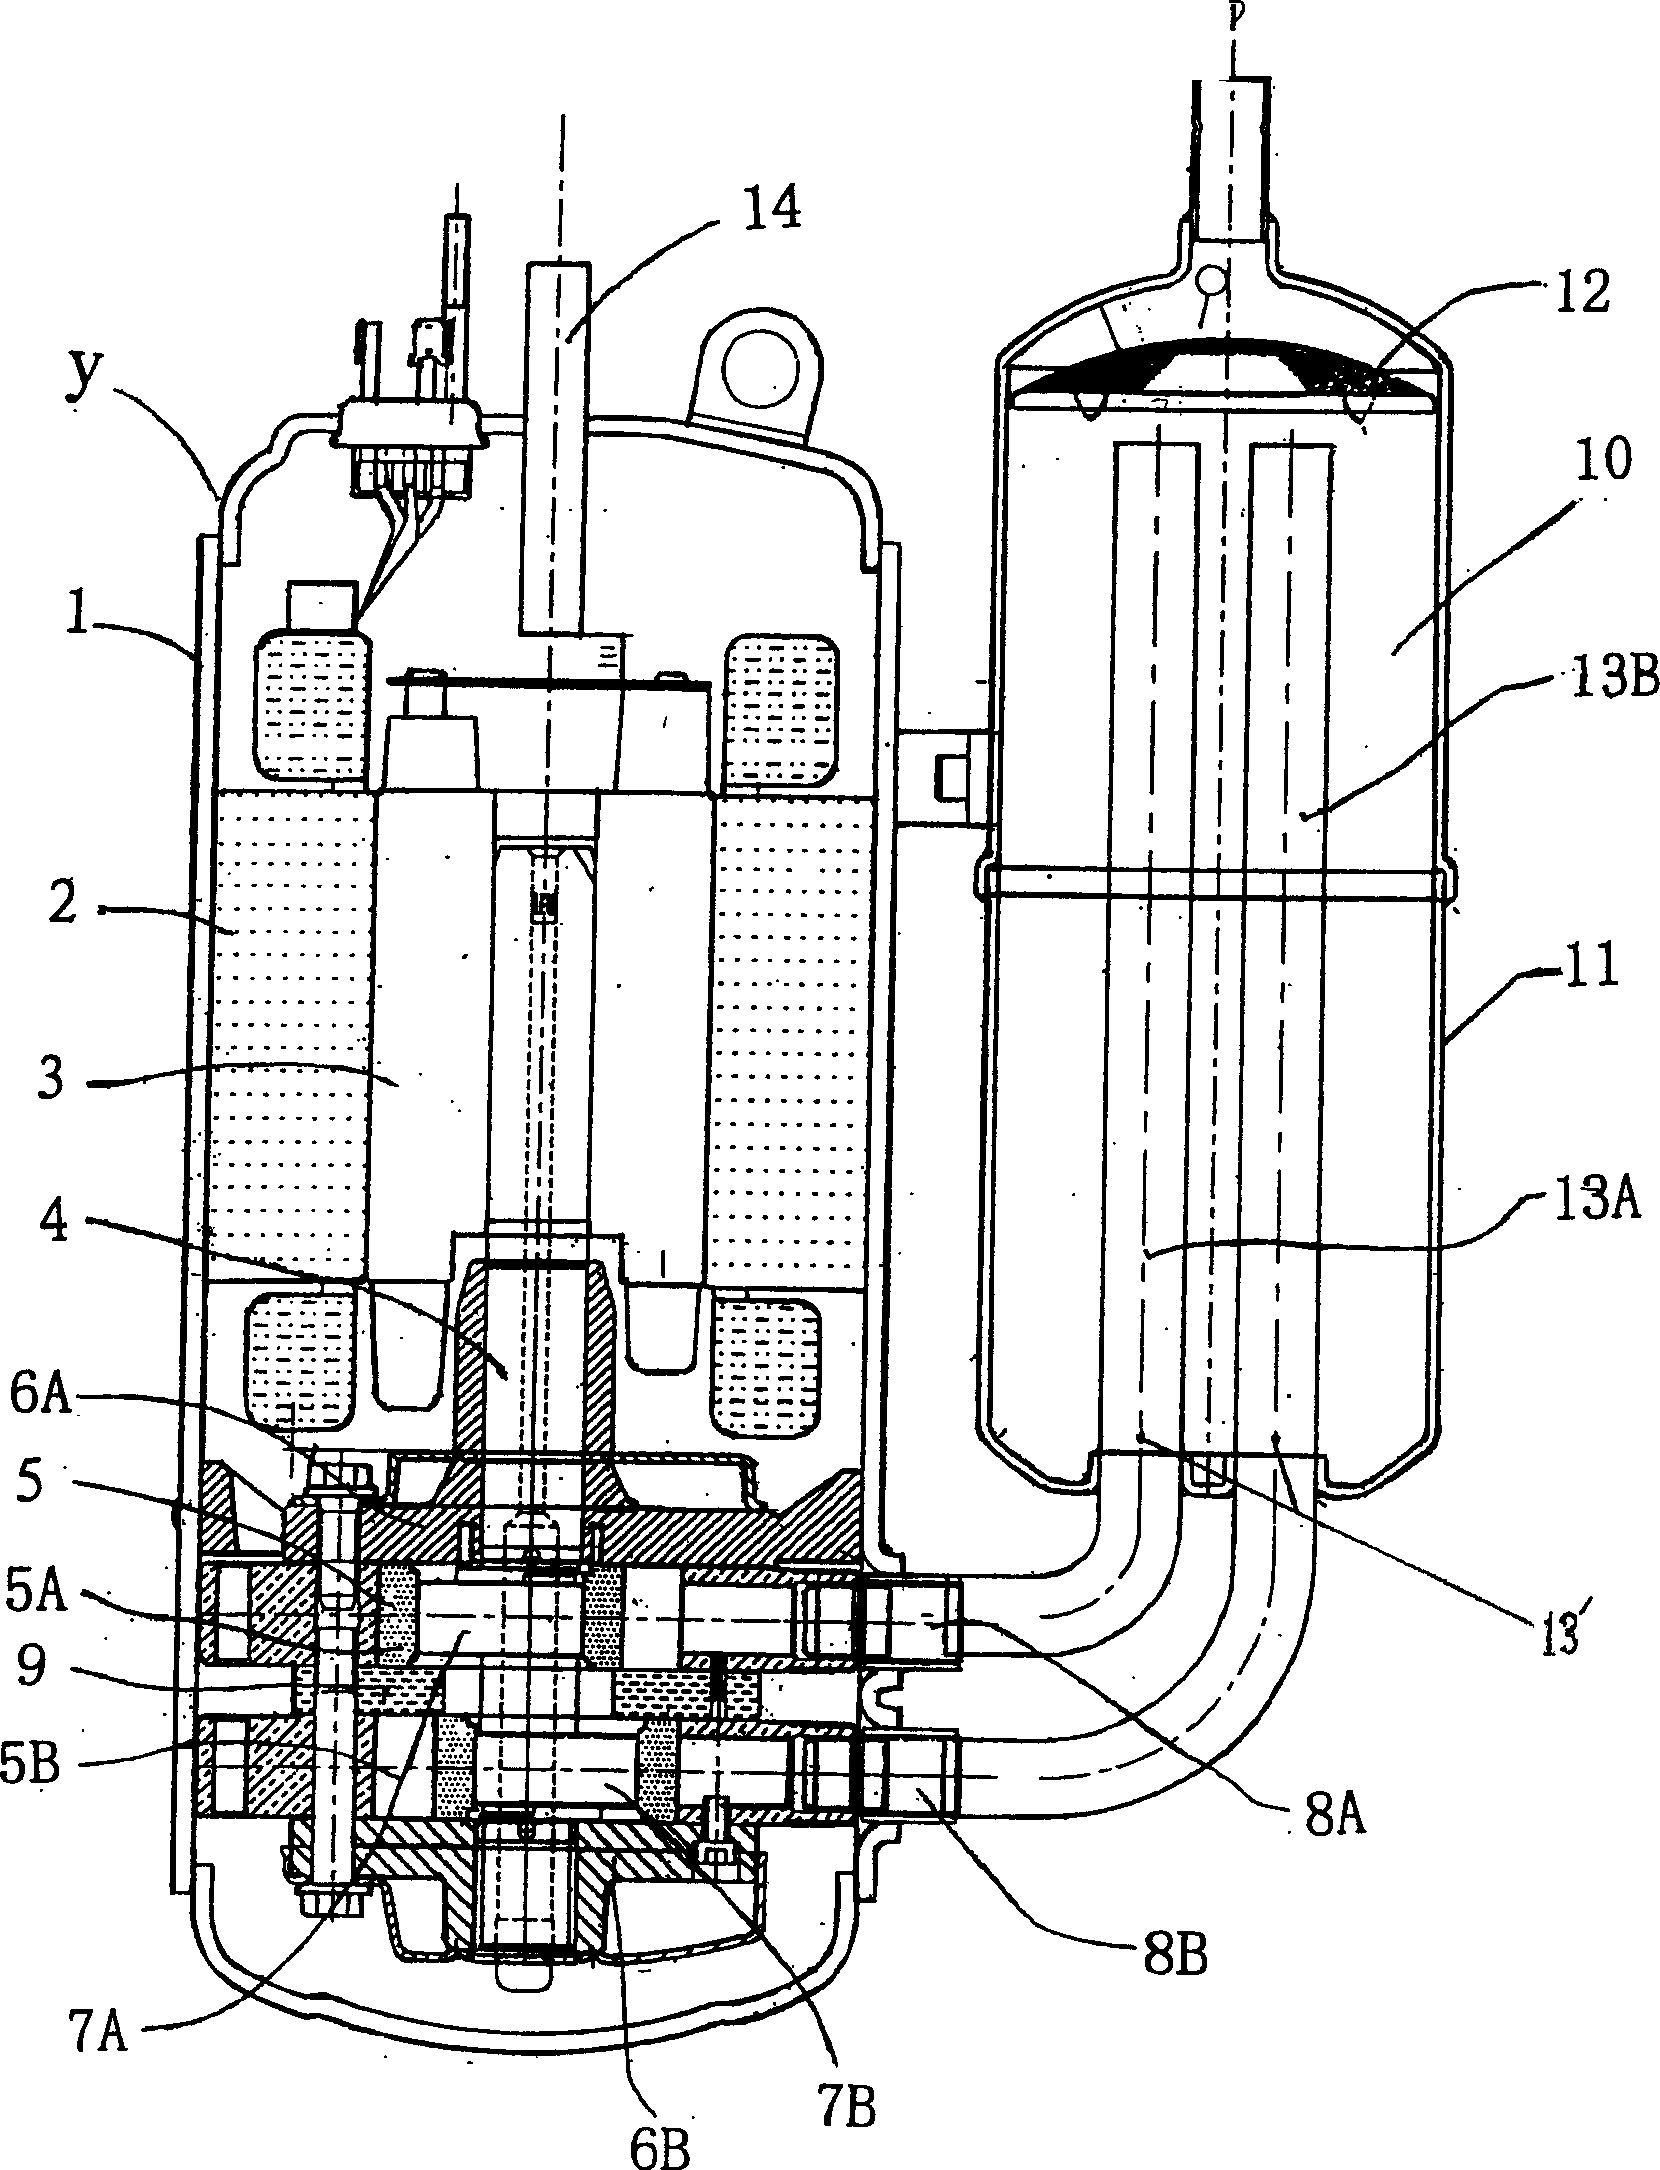 Structure of gas-liquid separator with rotary dual cylinder compressor